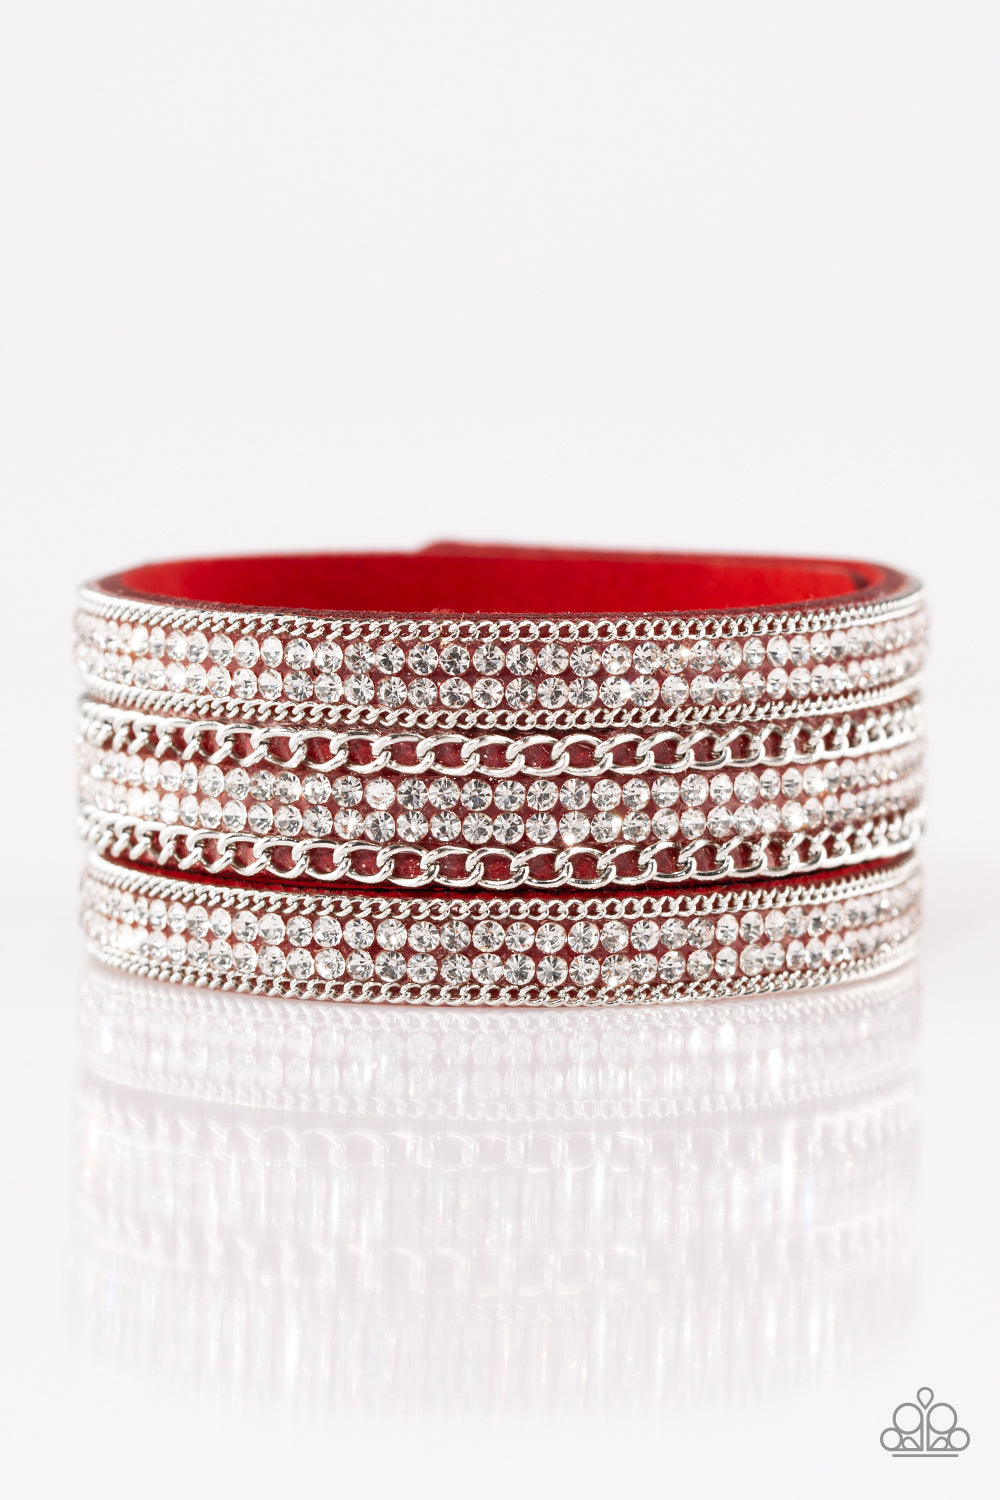 Dangerously Drama Queen - Red - Bracelets - Paparazzi Accessories